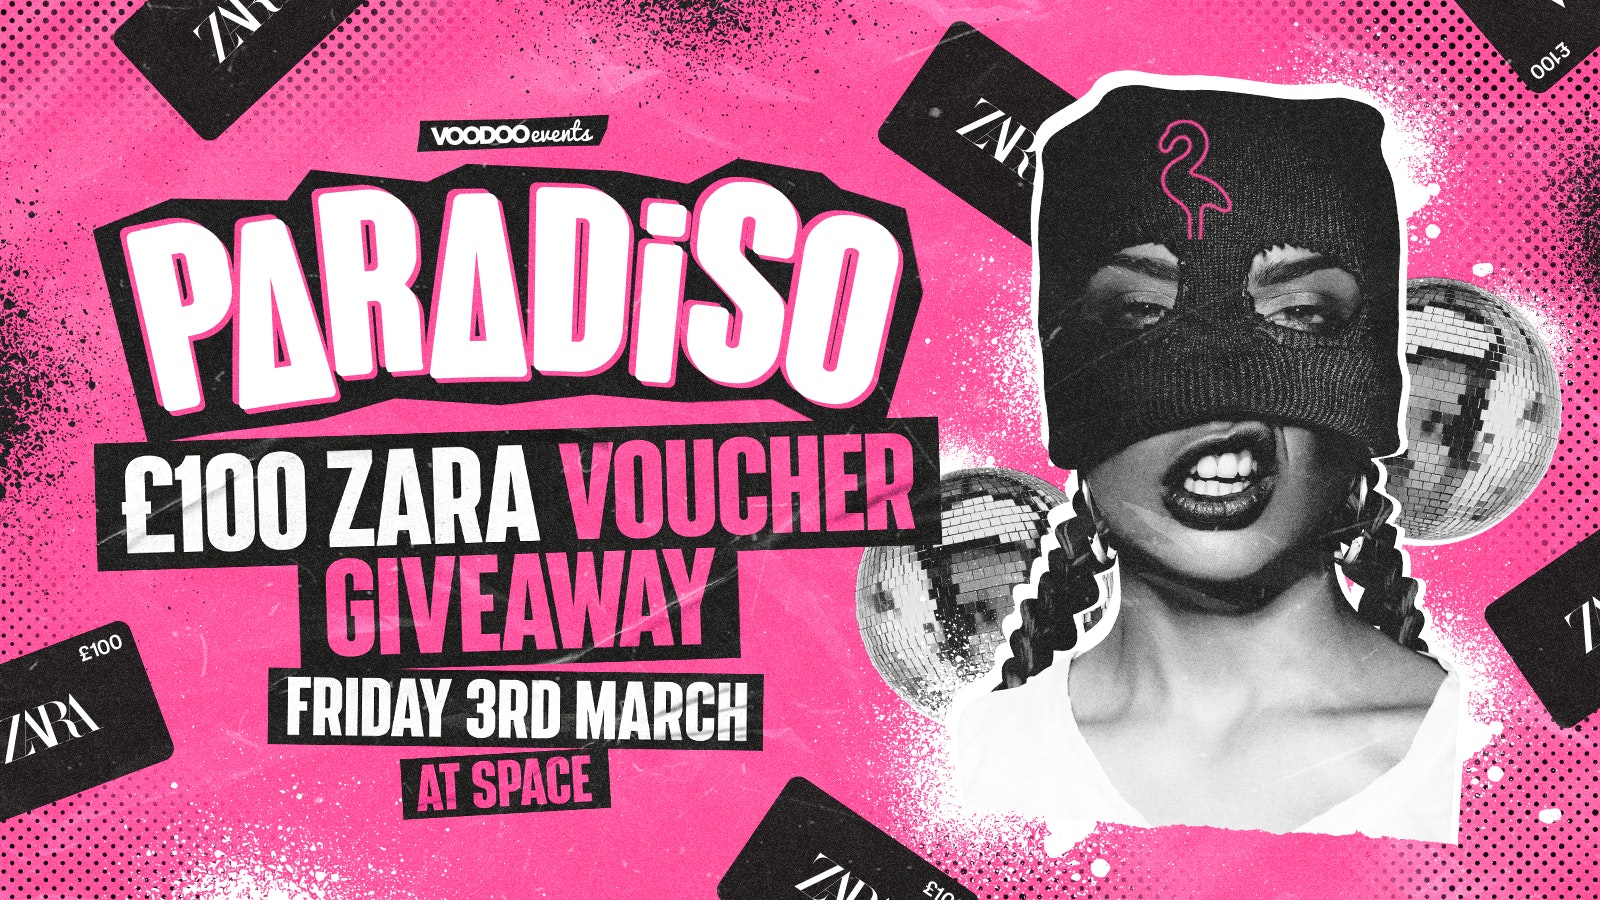 Paradiso Fridays at Space £100 ZARA VOUCHER GIVEAWAY – 1st March